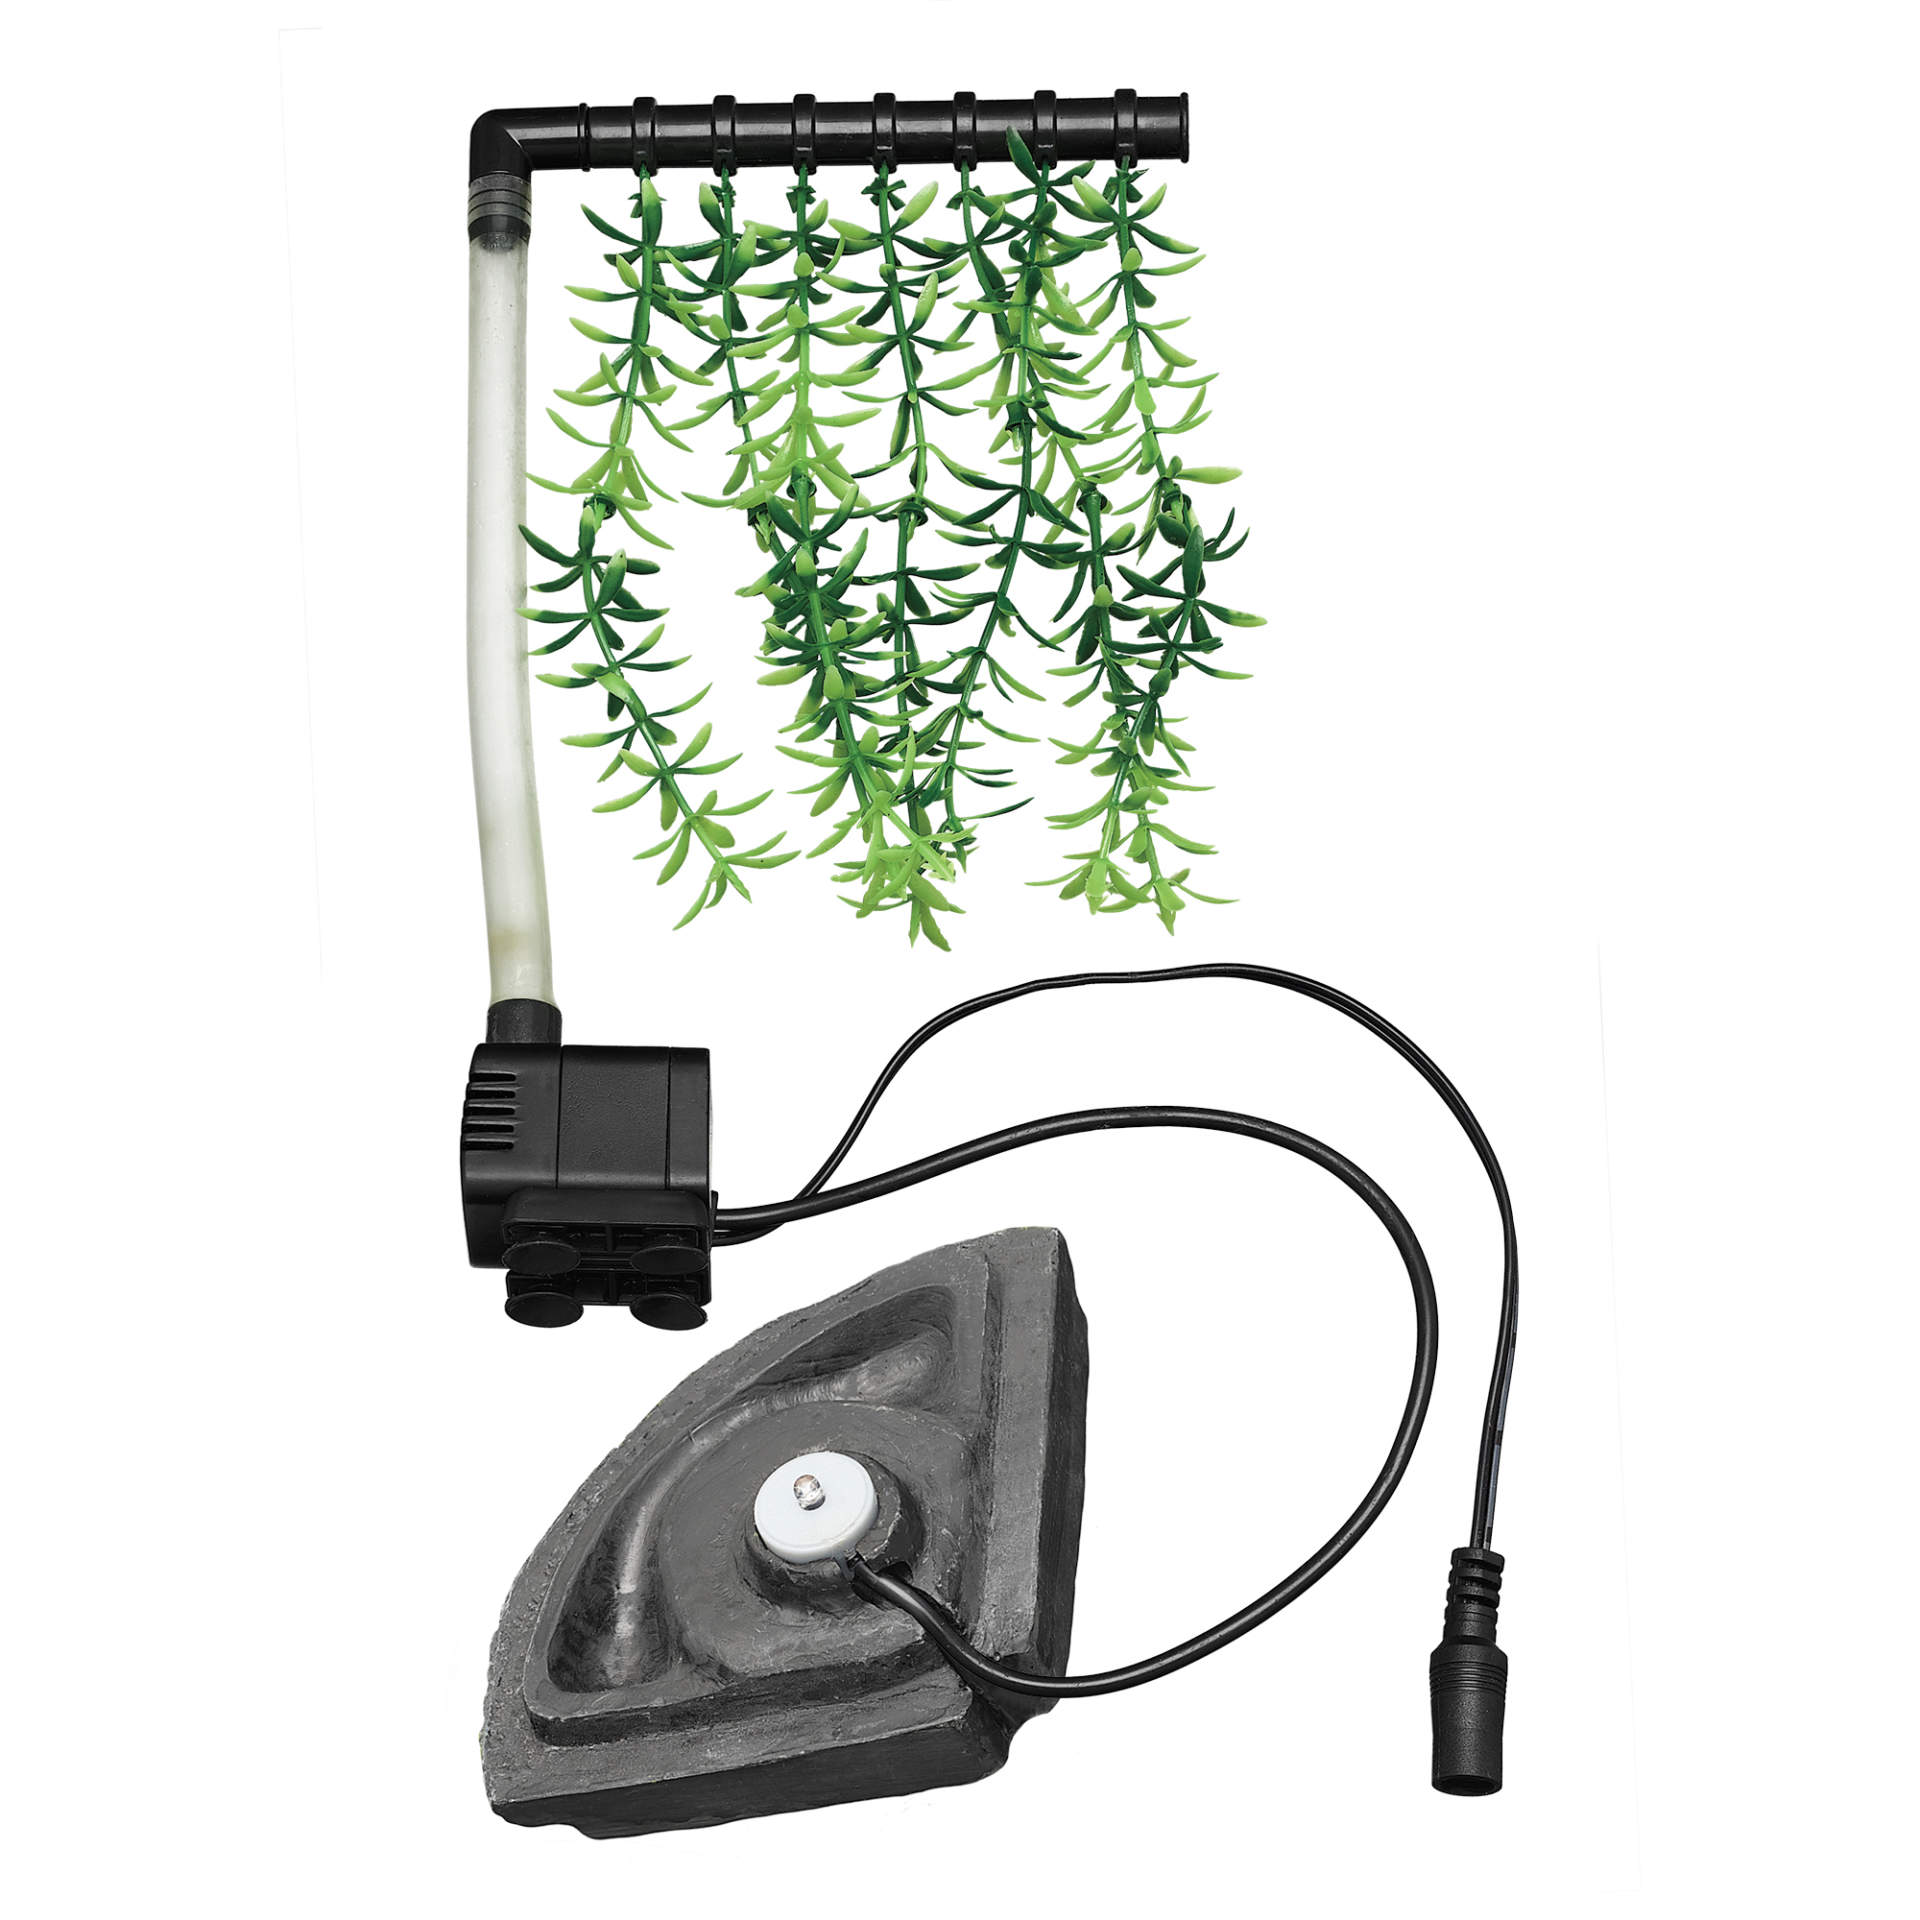 Zilla Spring Cave Plant LED